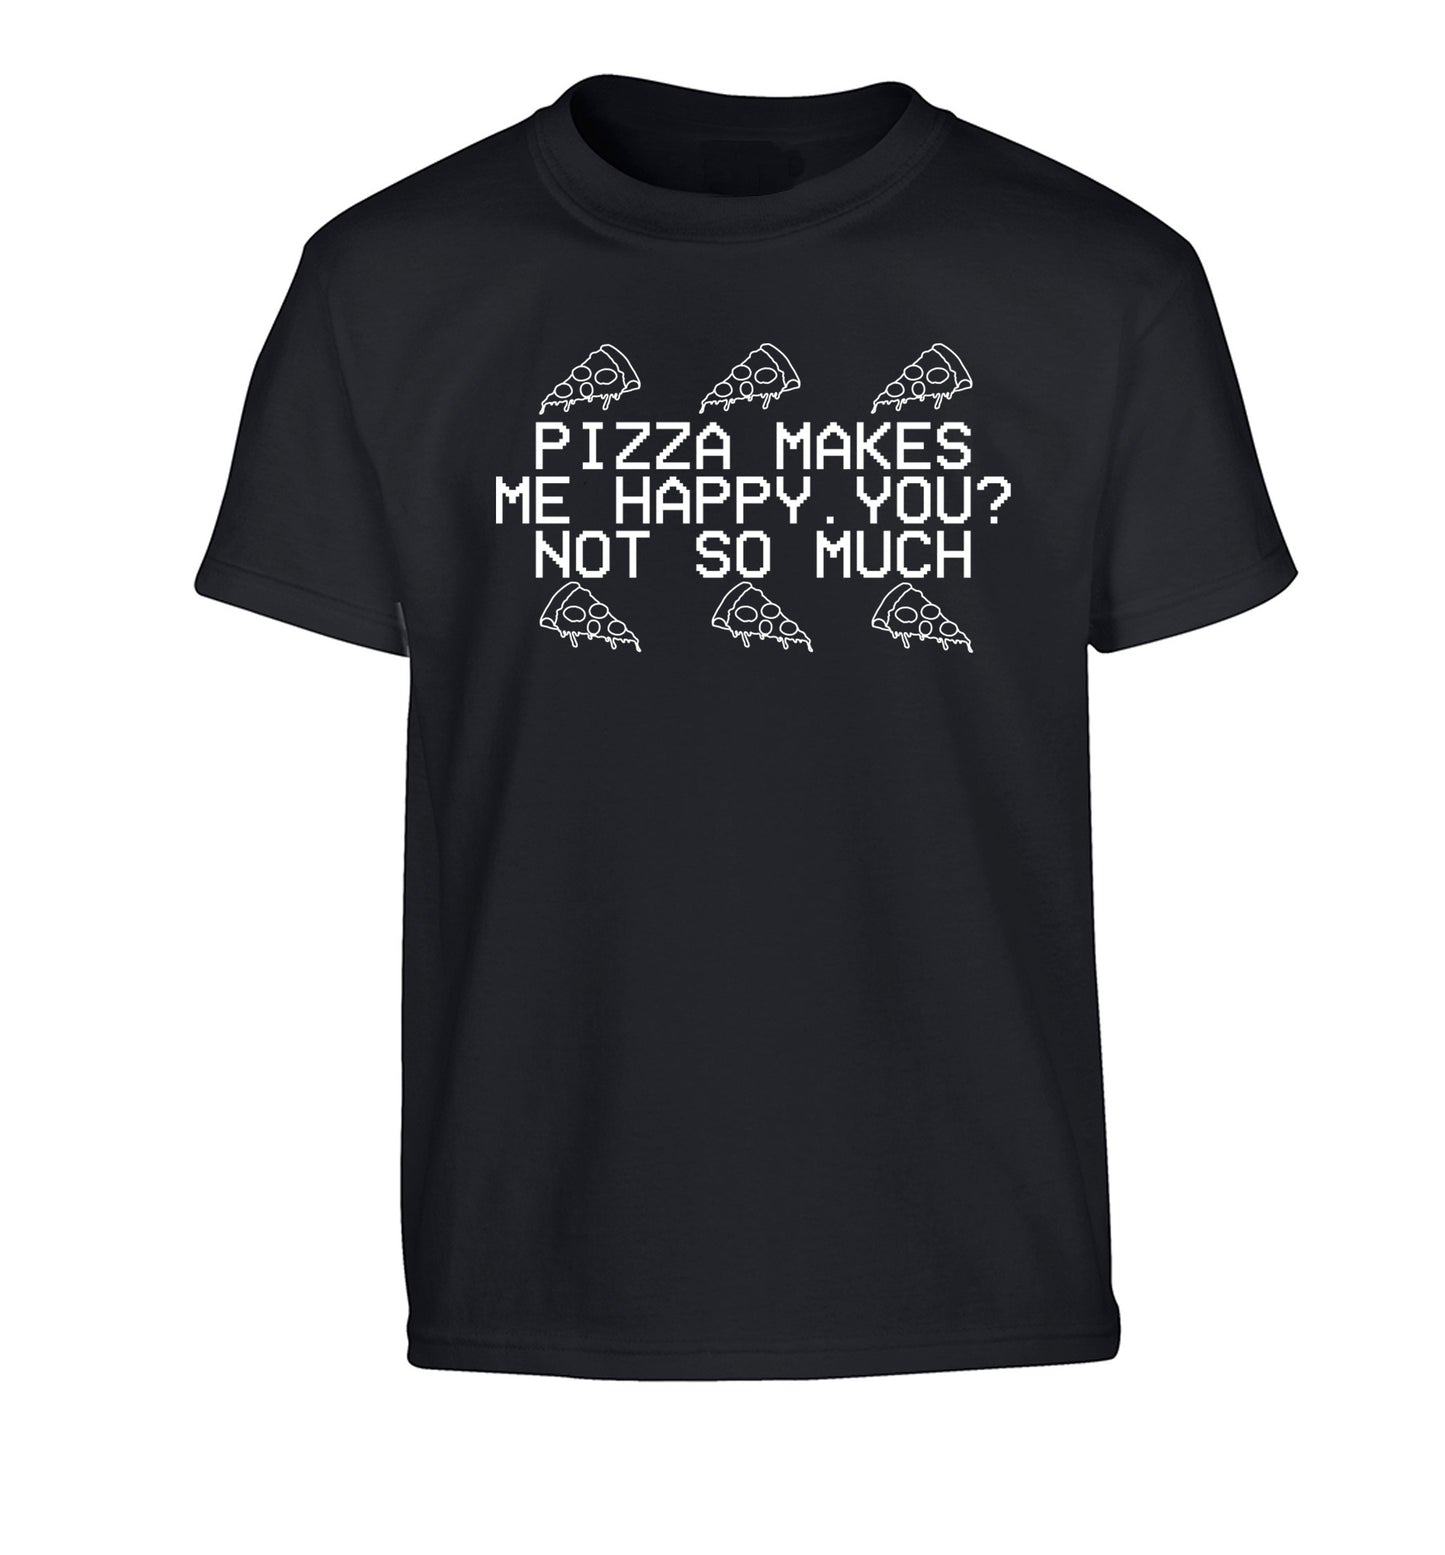 Pizza makes me happy, You? Not so much Children's black Tshirt 12-14 Years